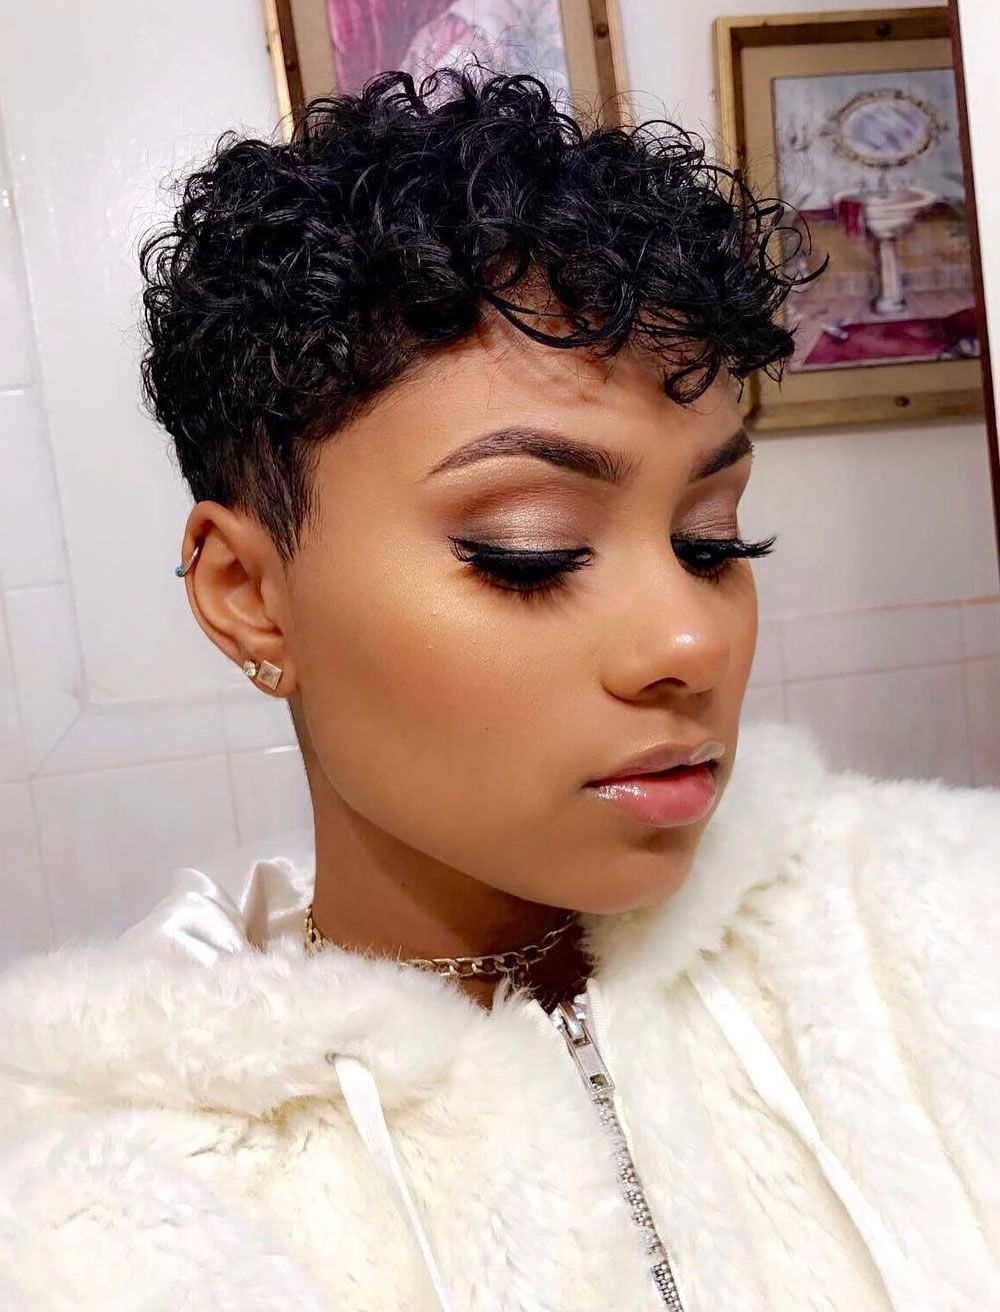 Curly Natural Short Hair Hairstyles For Black Women – Hairstyles With Curly Short Hairstyles For Black Women (View 2 of 25)